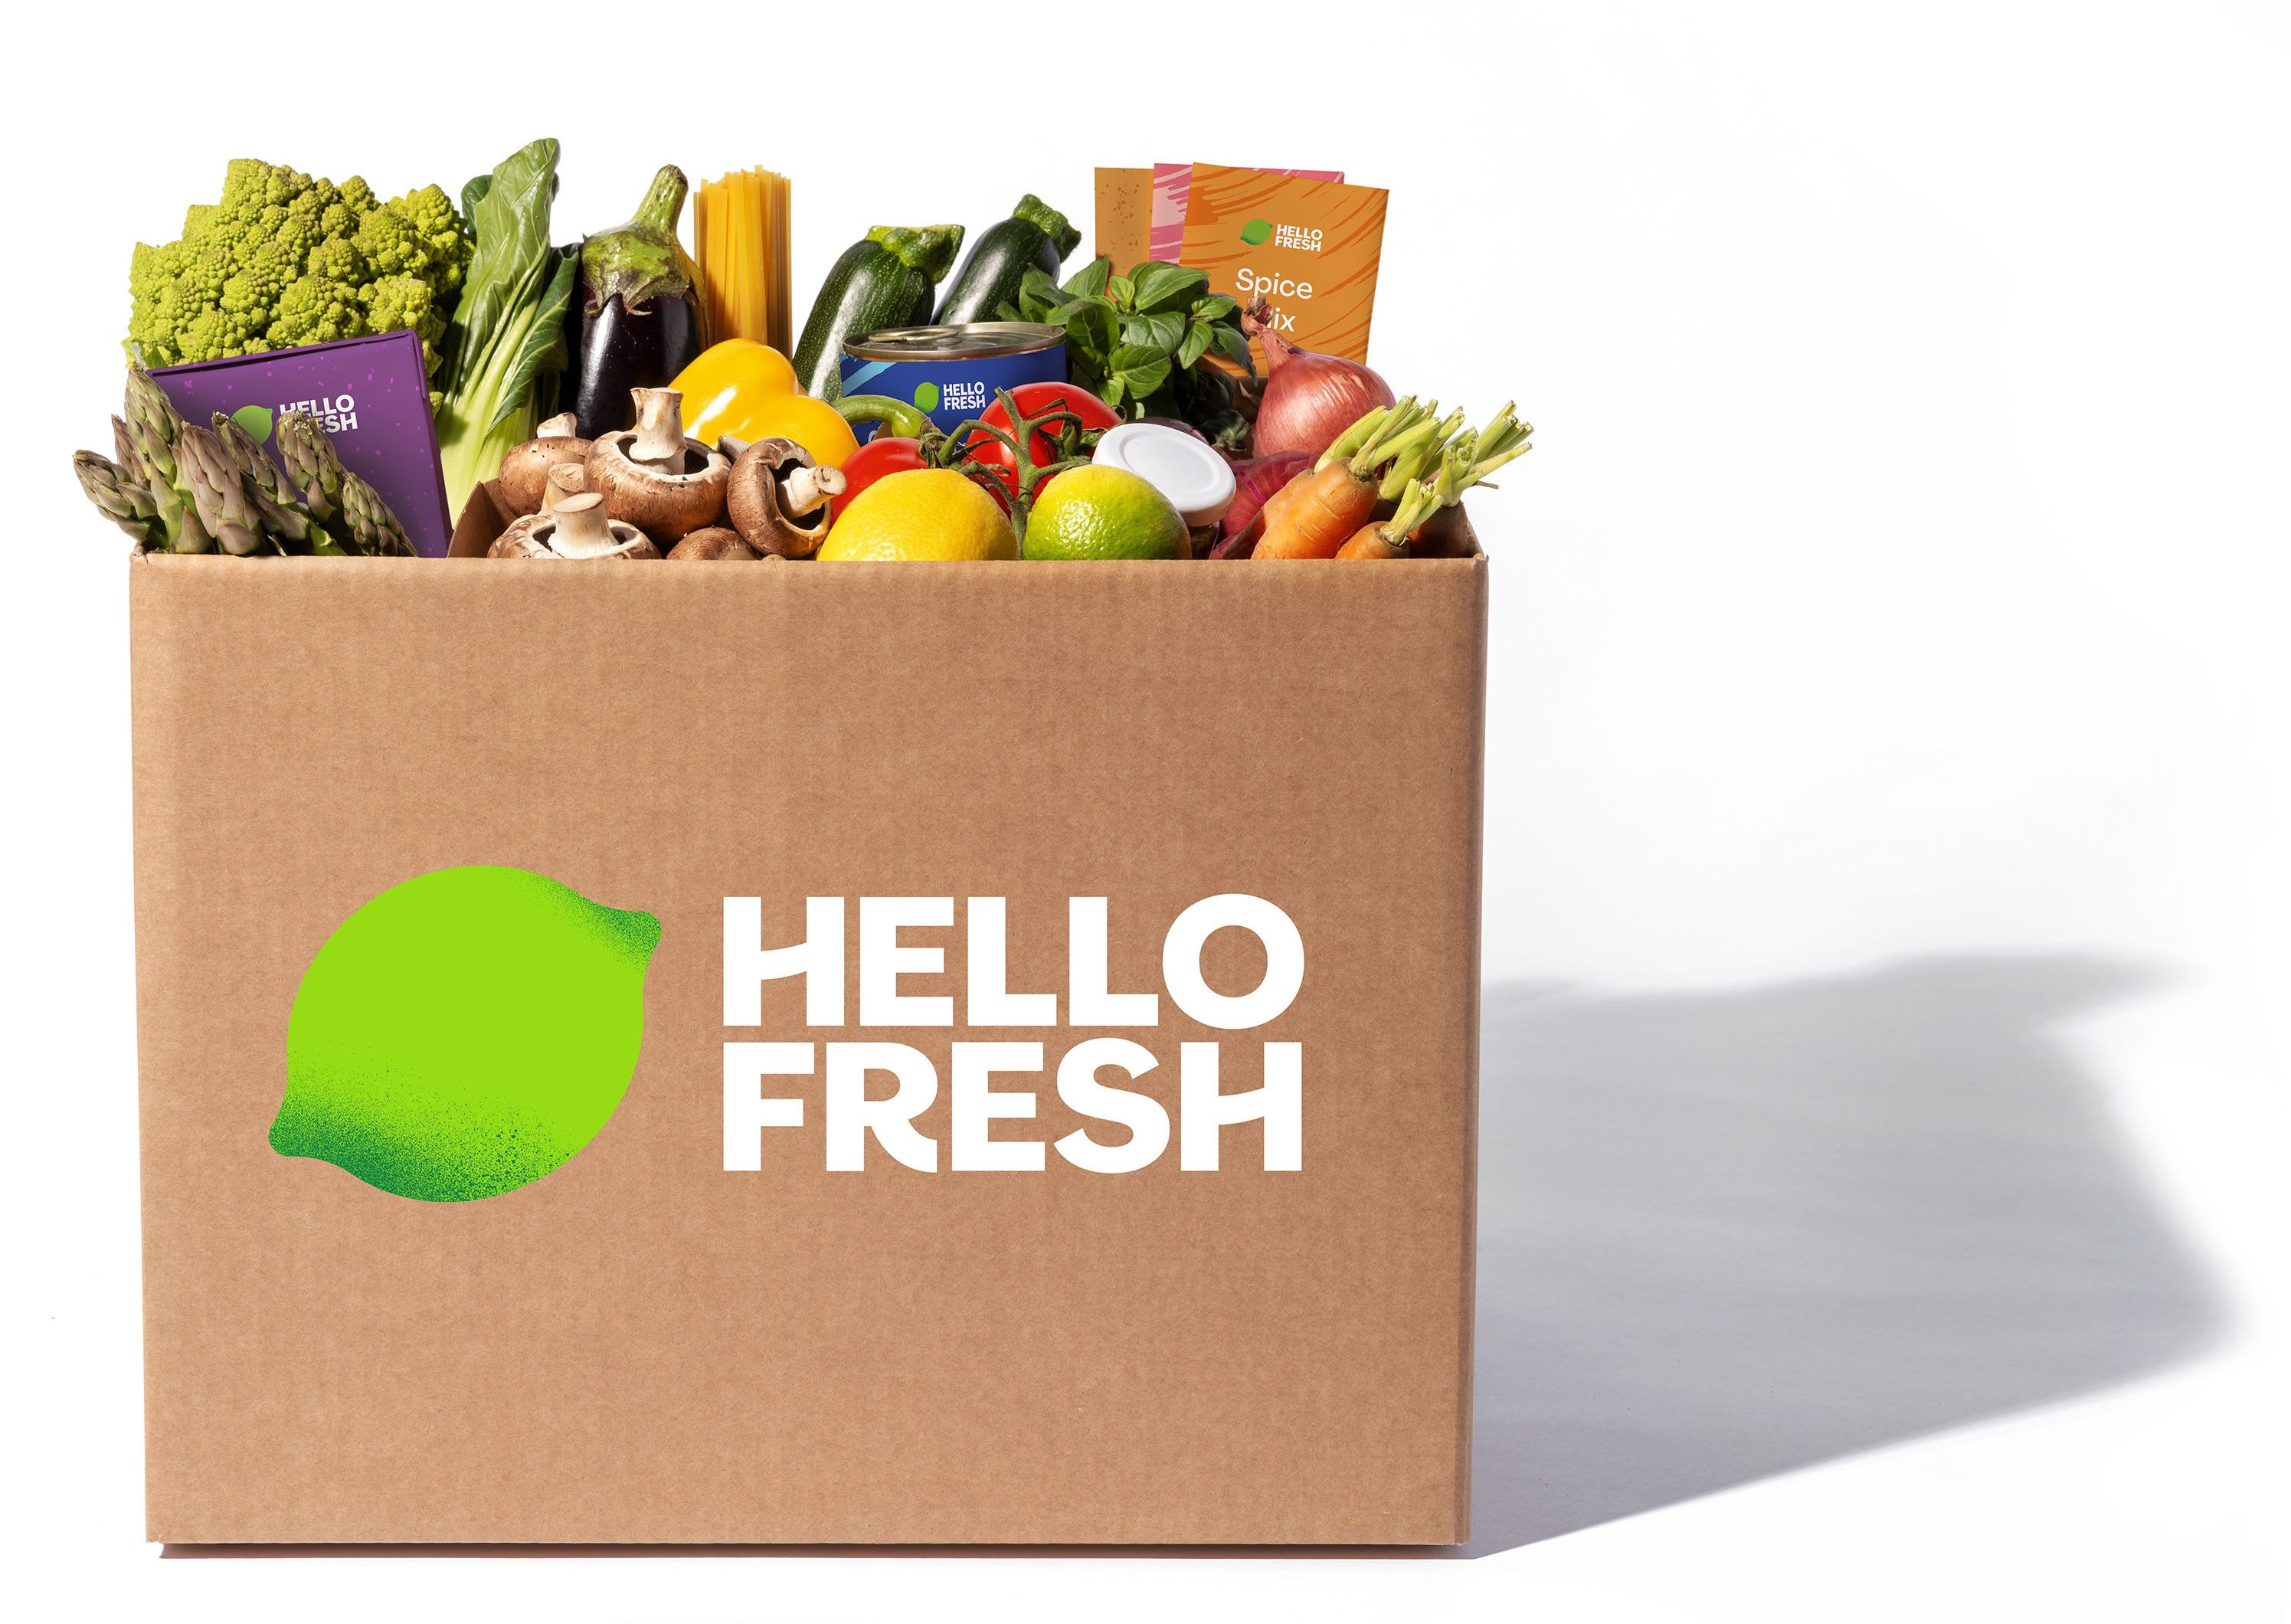 <h2>Does HelloFresh deliver to me?</h2>